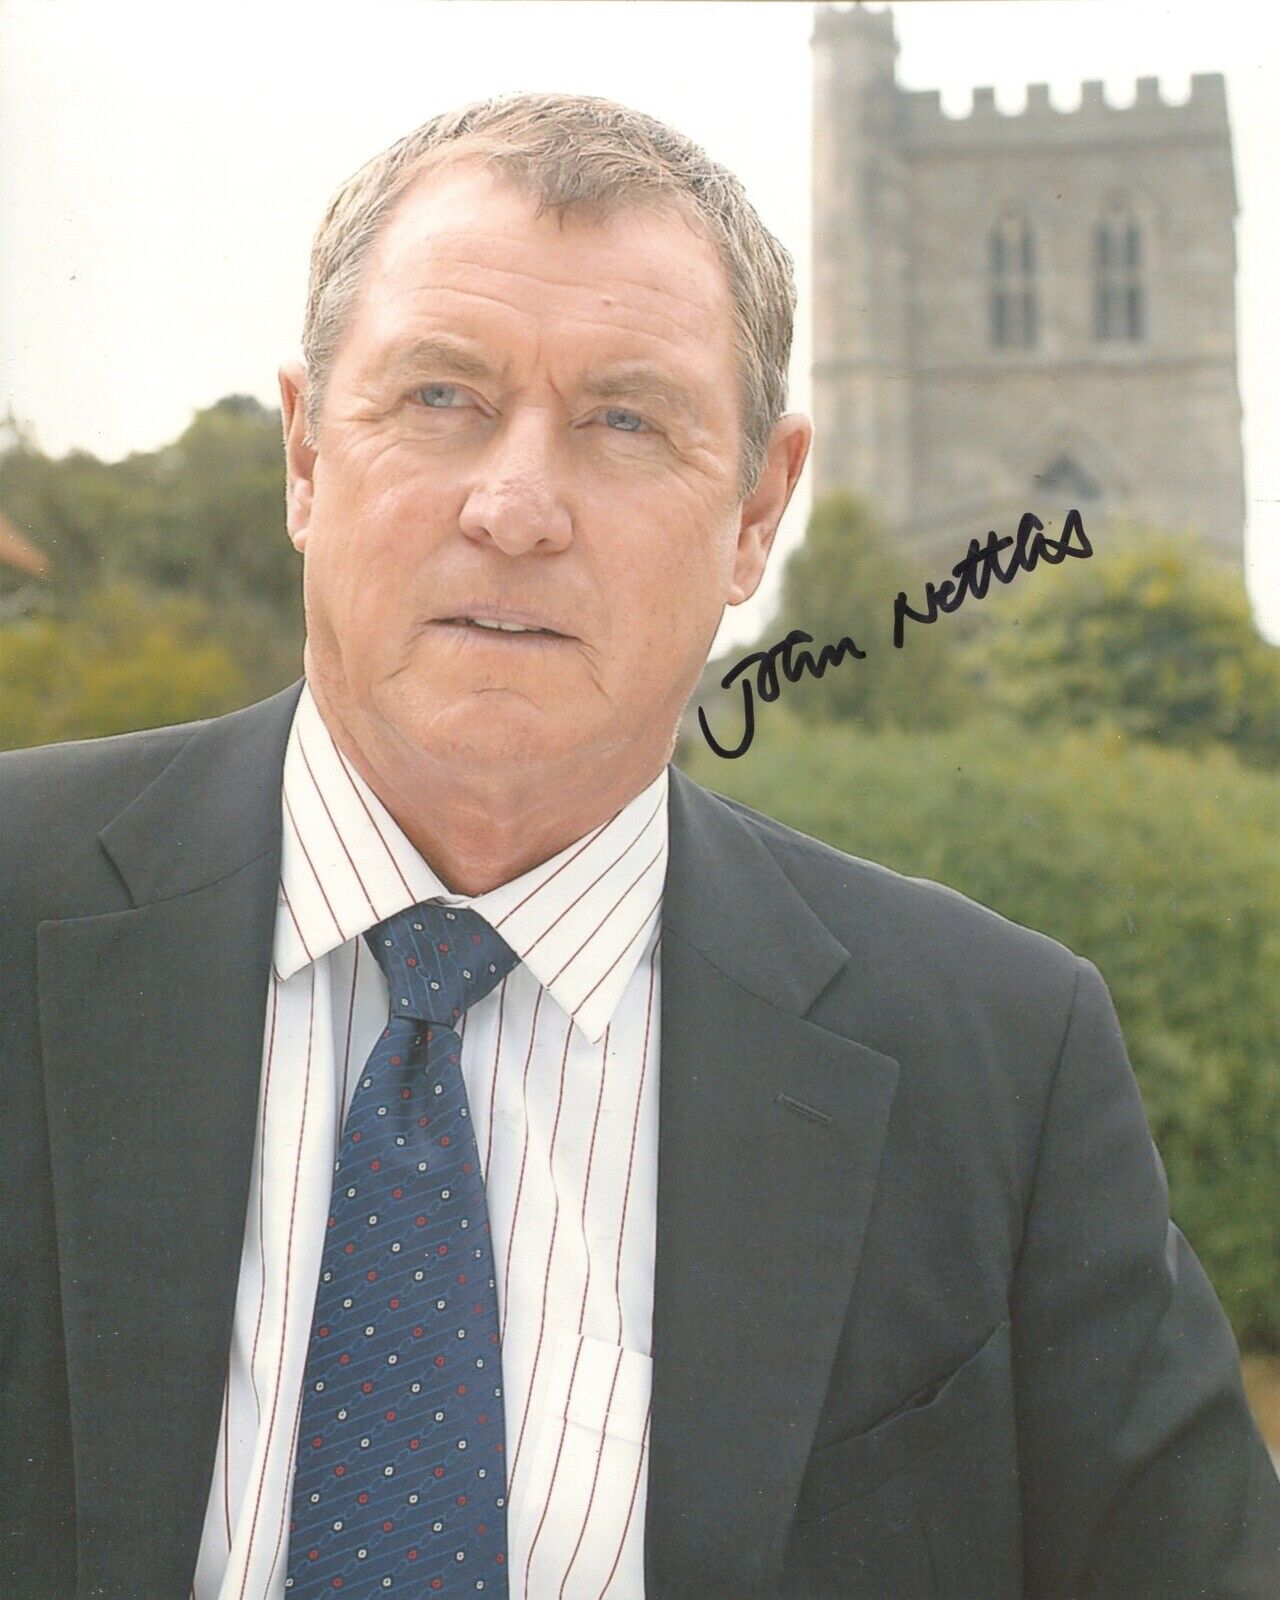 Midsomer Murders 8x10 TV detective Photo Poster painting signed by actor John Nettles IMAGE No6